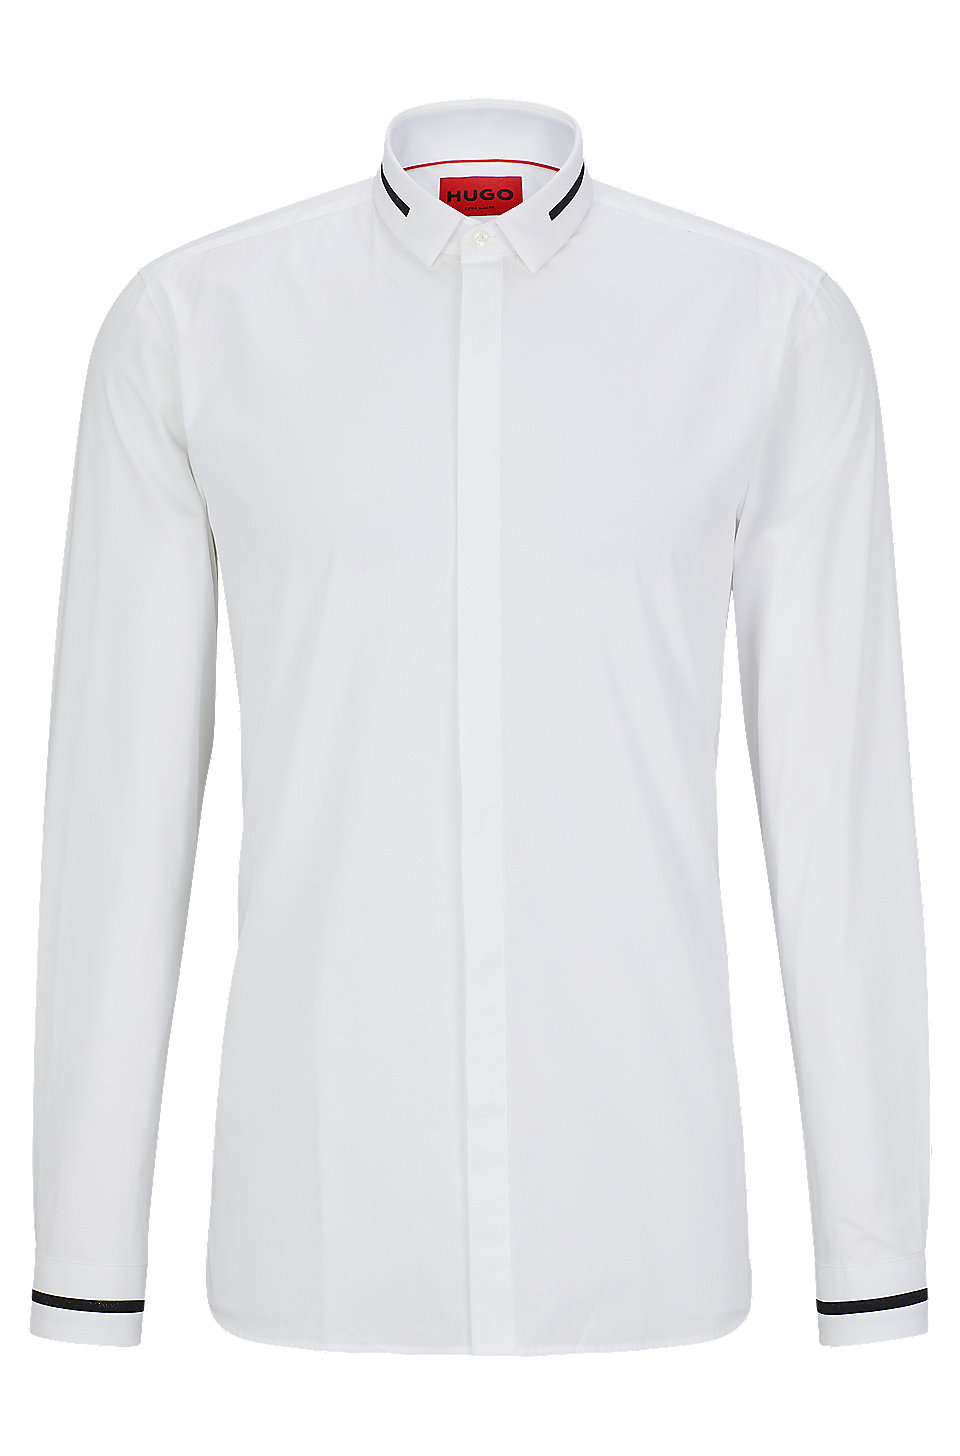 HUGO - Extra-slim-fit shirt in cotton with contrast inserts